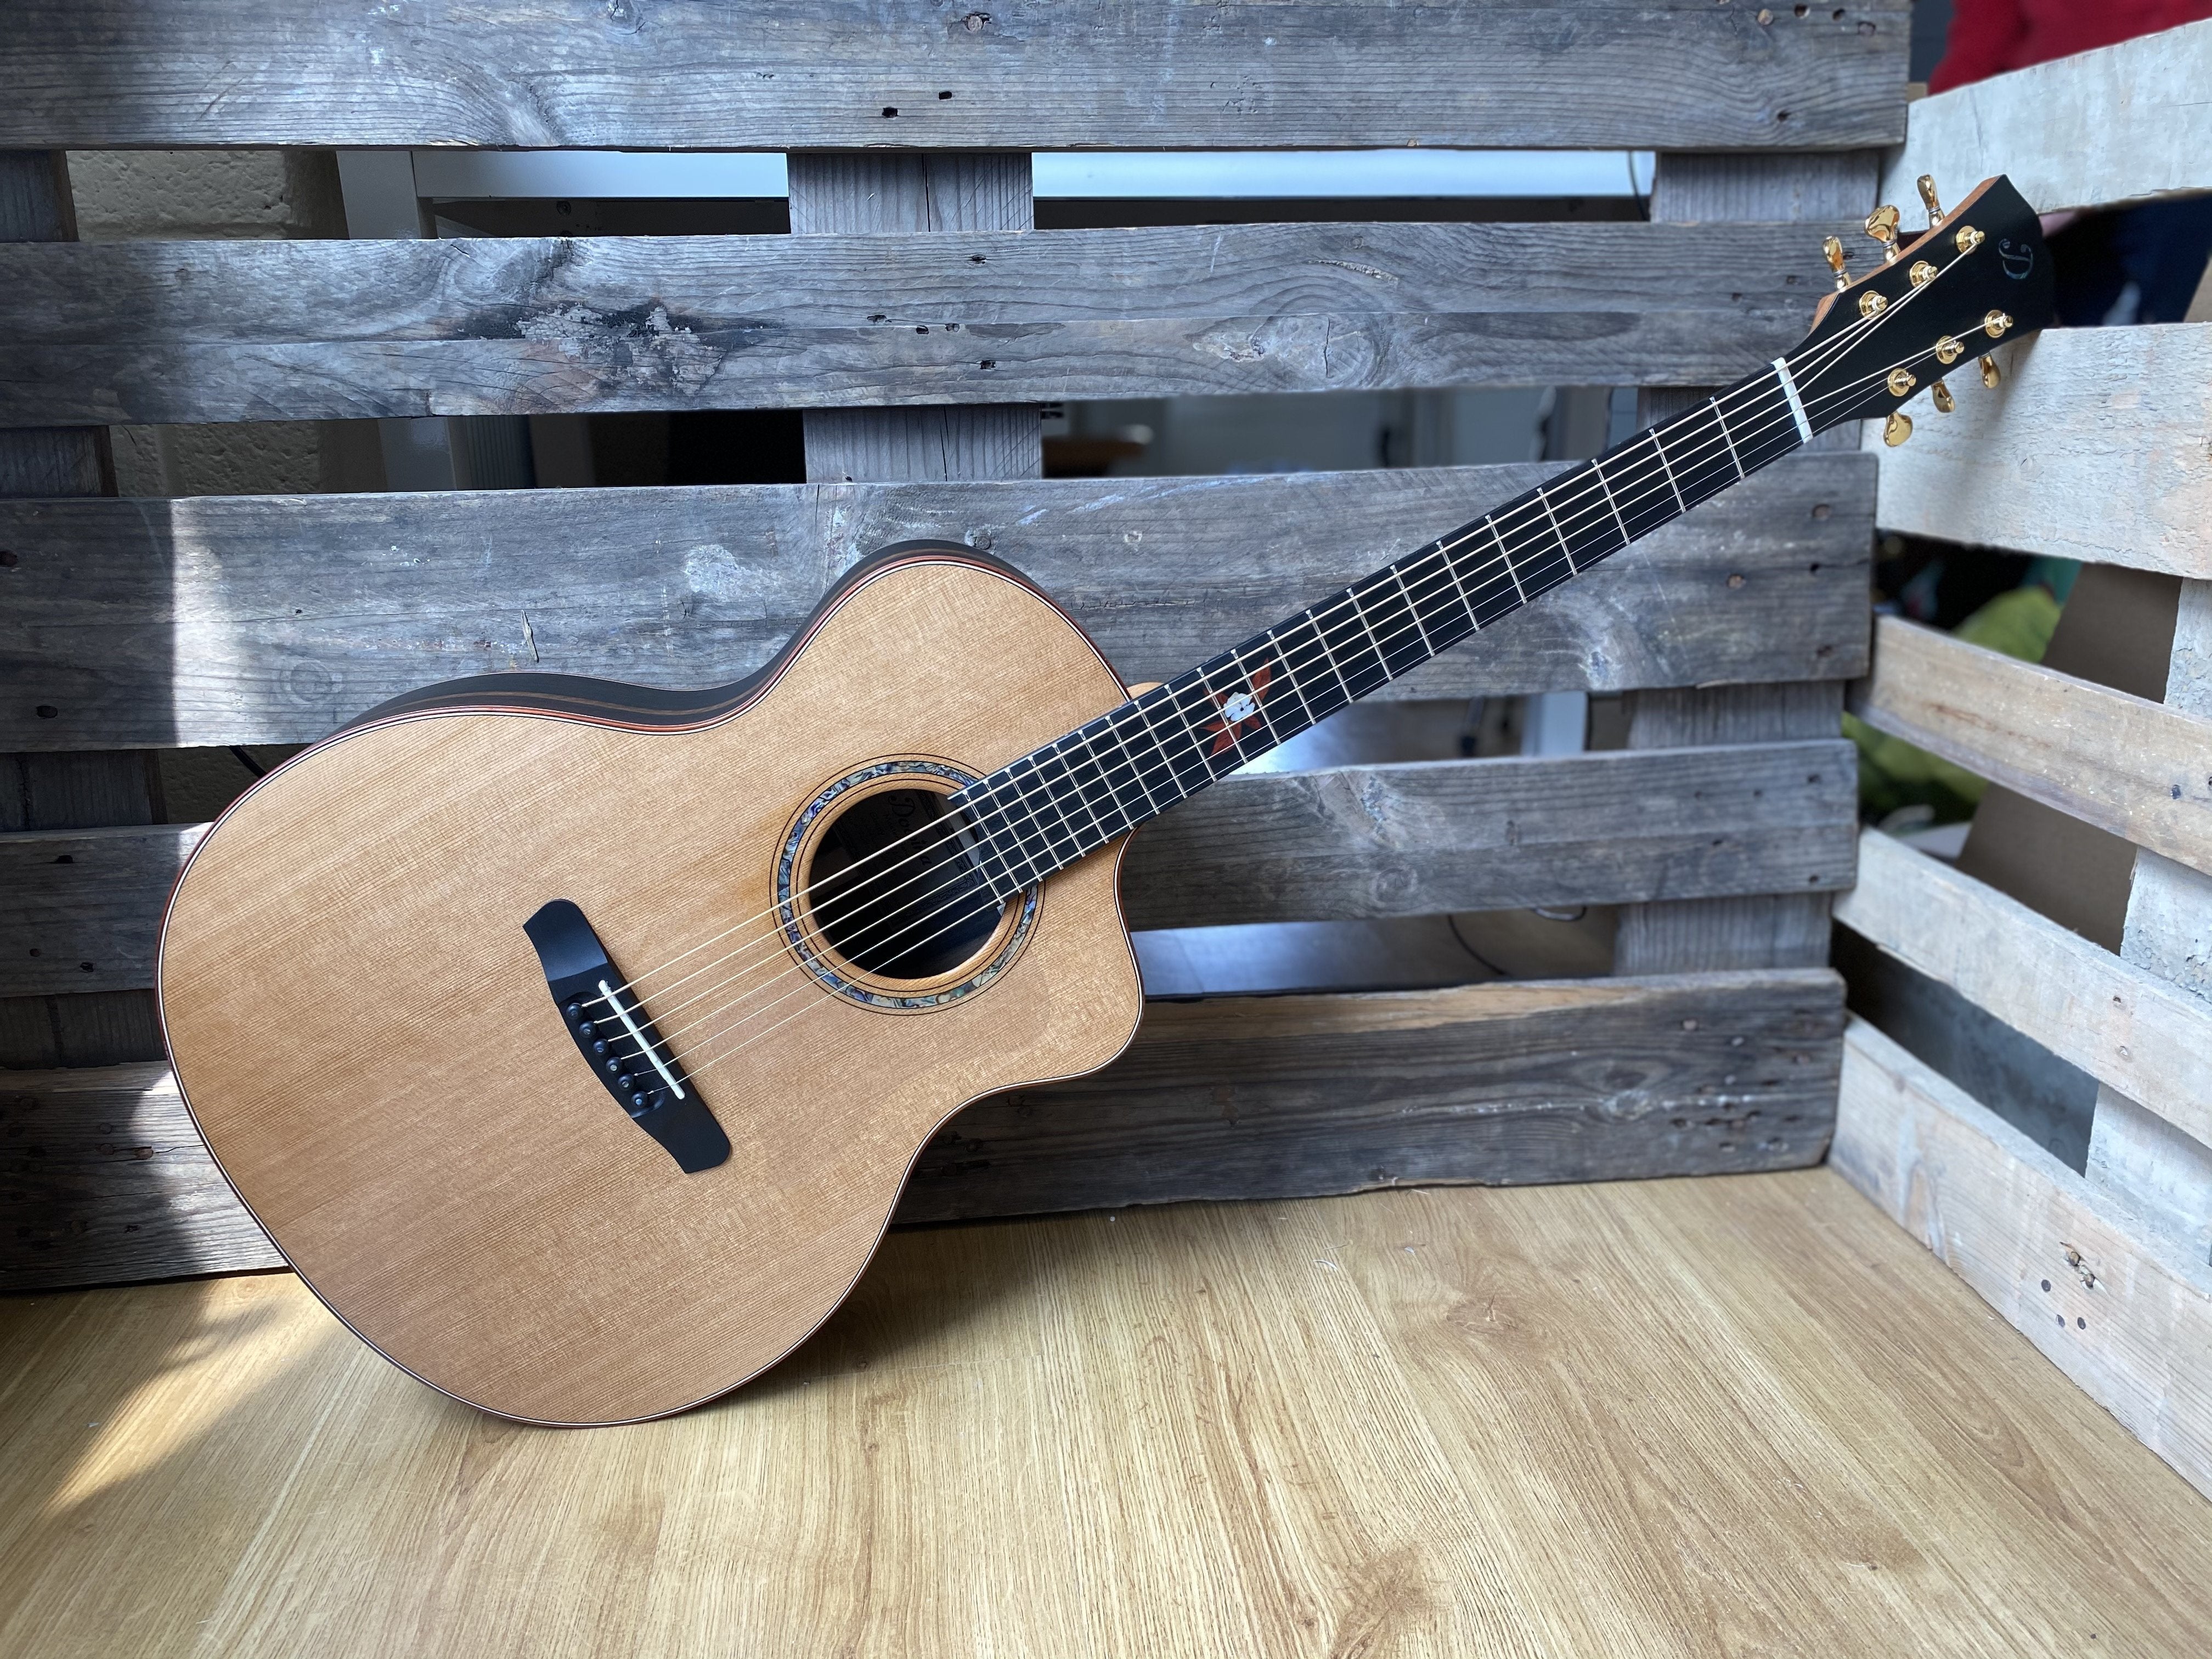 Dowina Figured Ebony GAC Deluxe Masters With Torrifed Swiss Moon Spruce Top, Acoustic Guitar for sale at Richards Guitars.